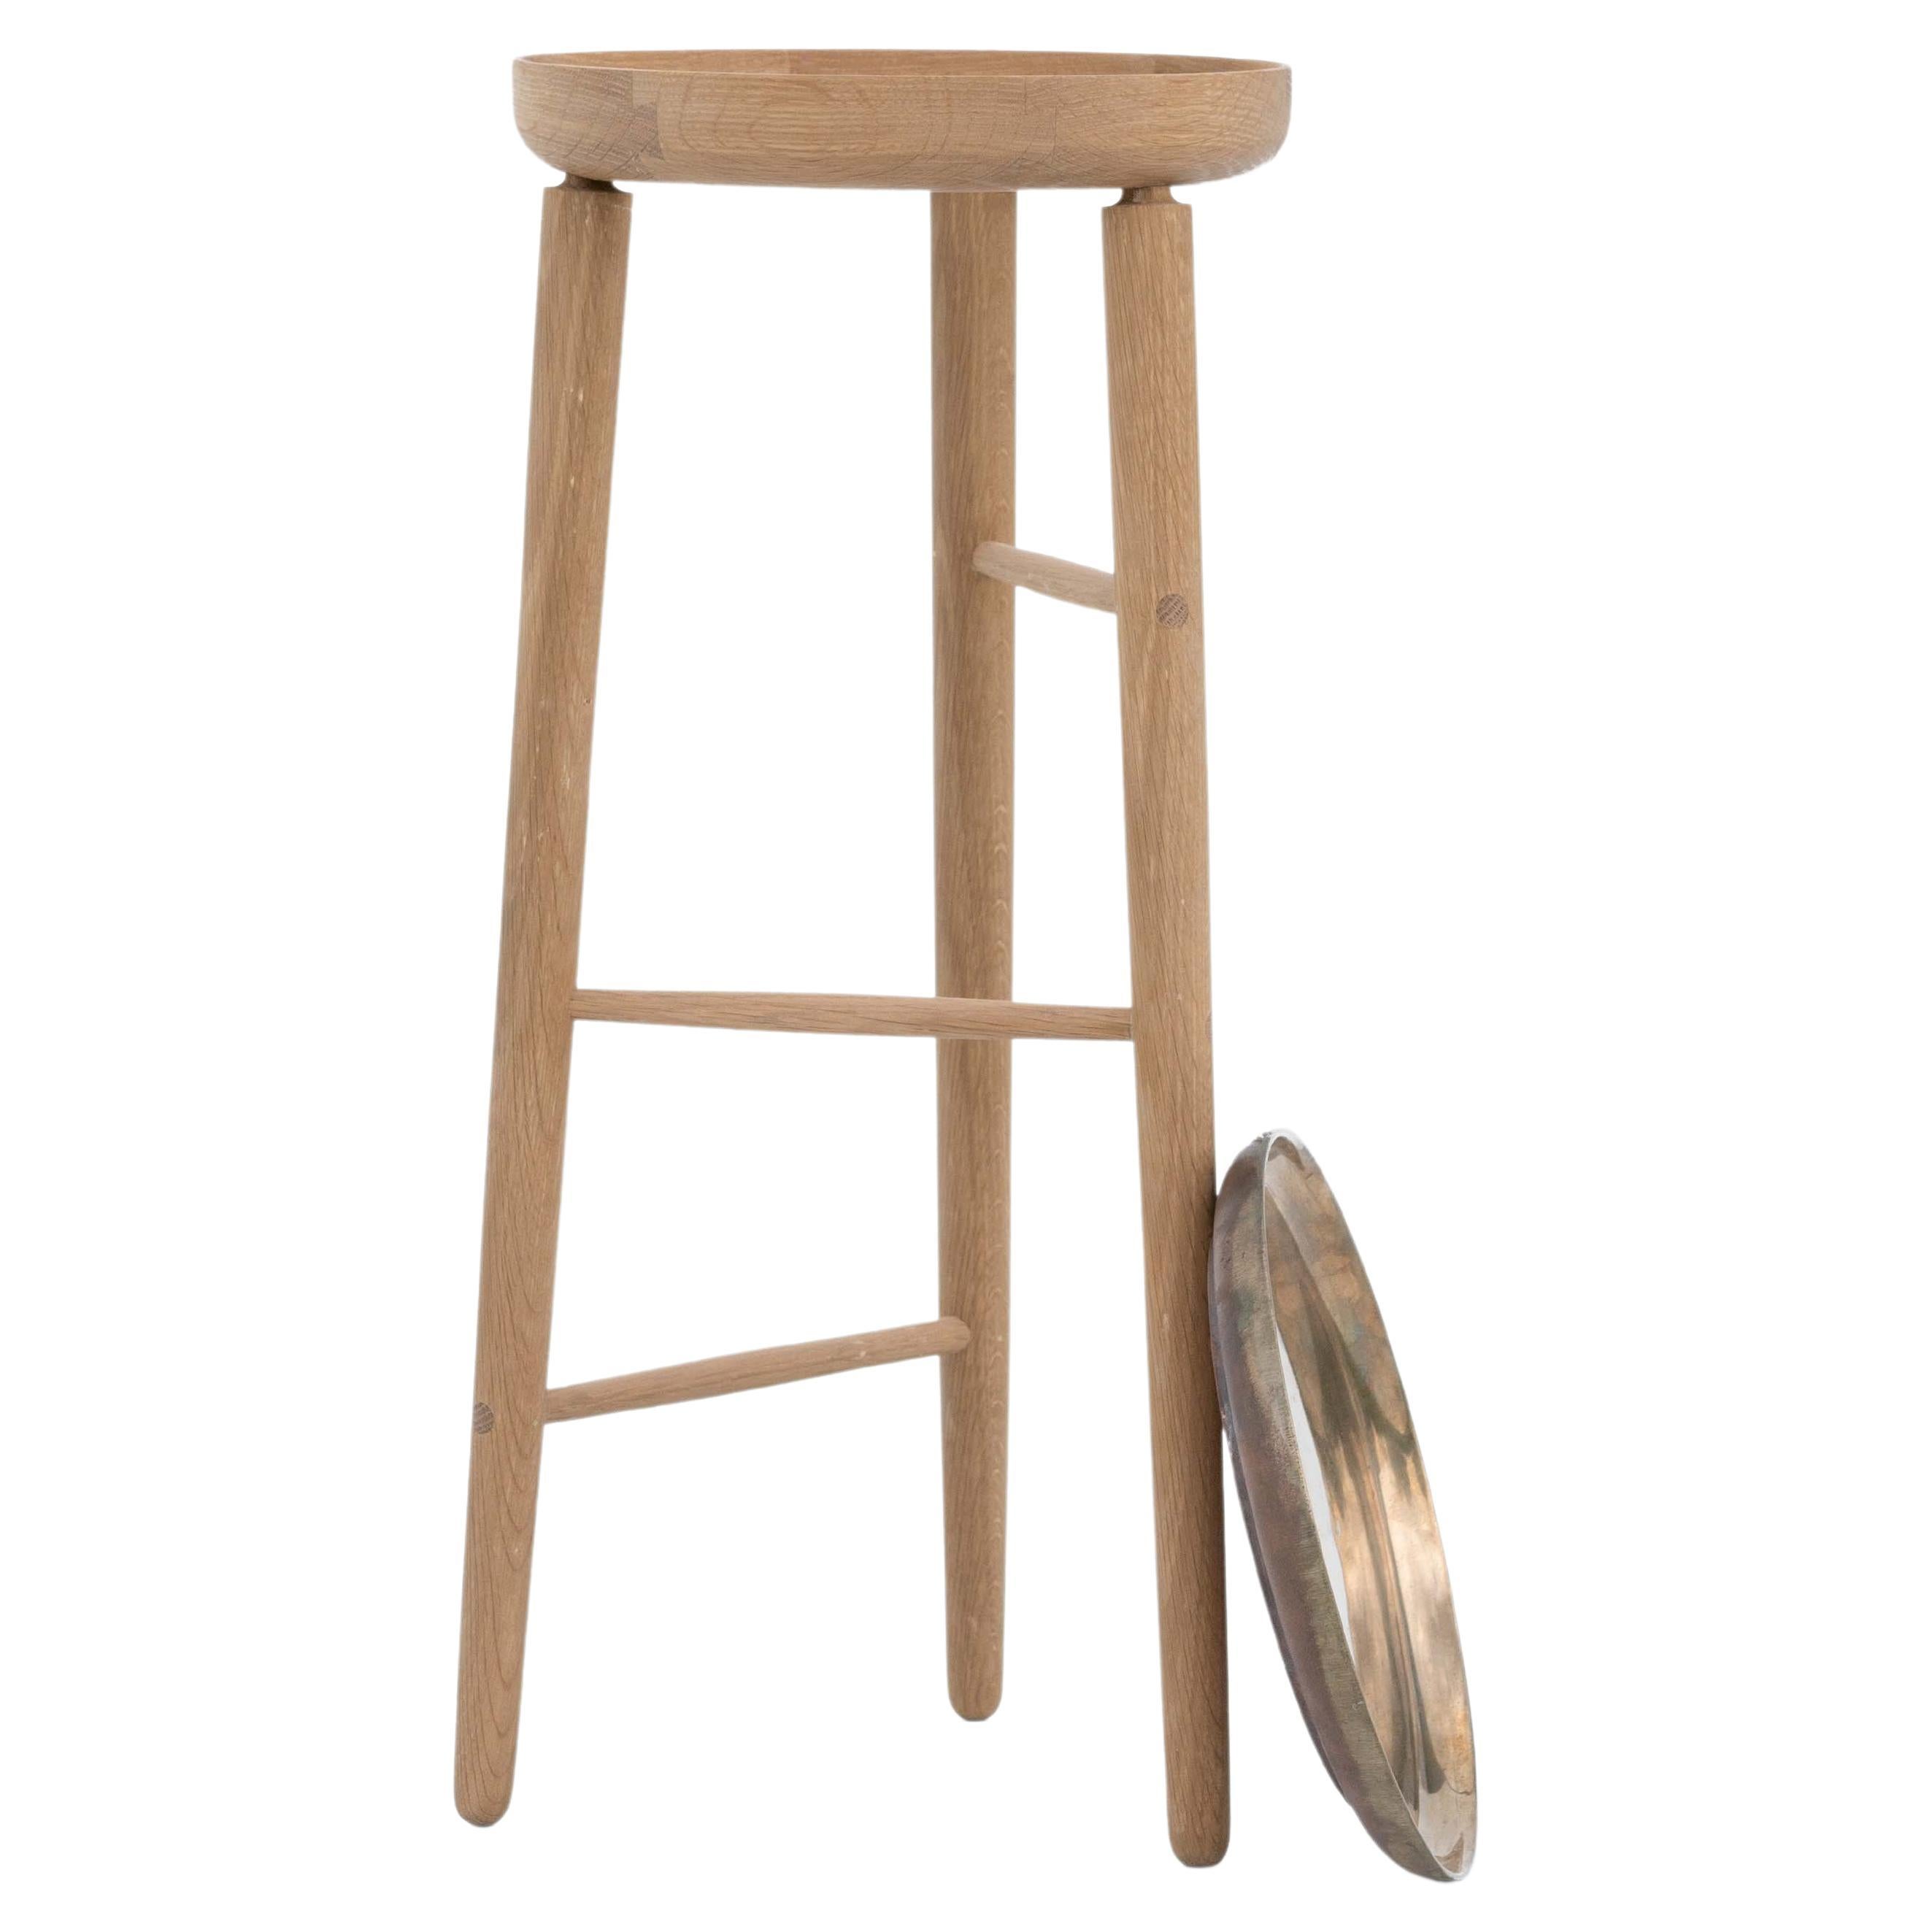 Baré Tall Plant Stand, White Oak with Cast Bronze Tray For Sale